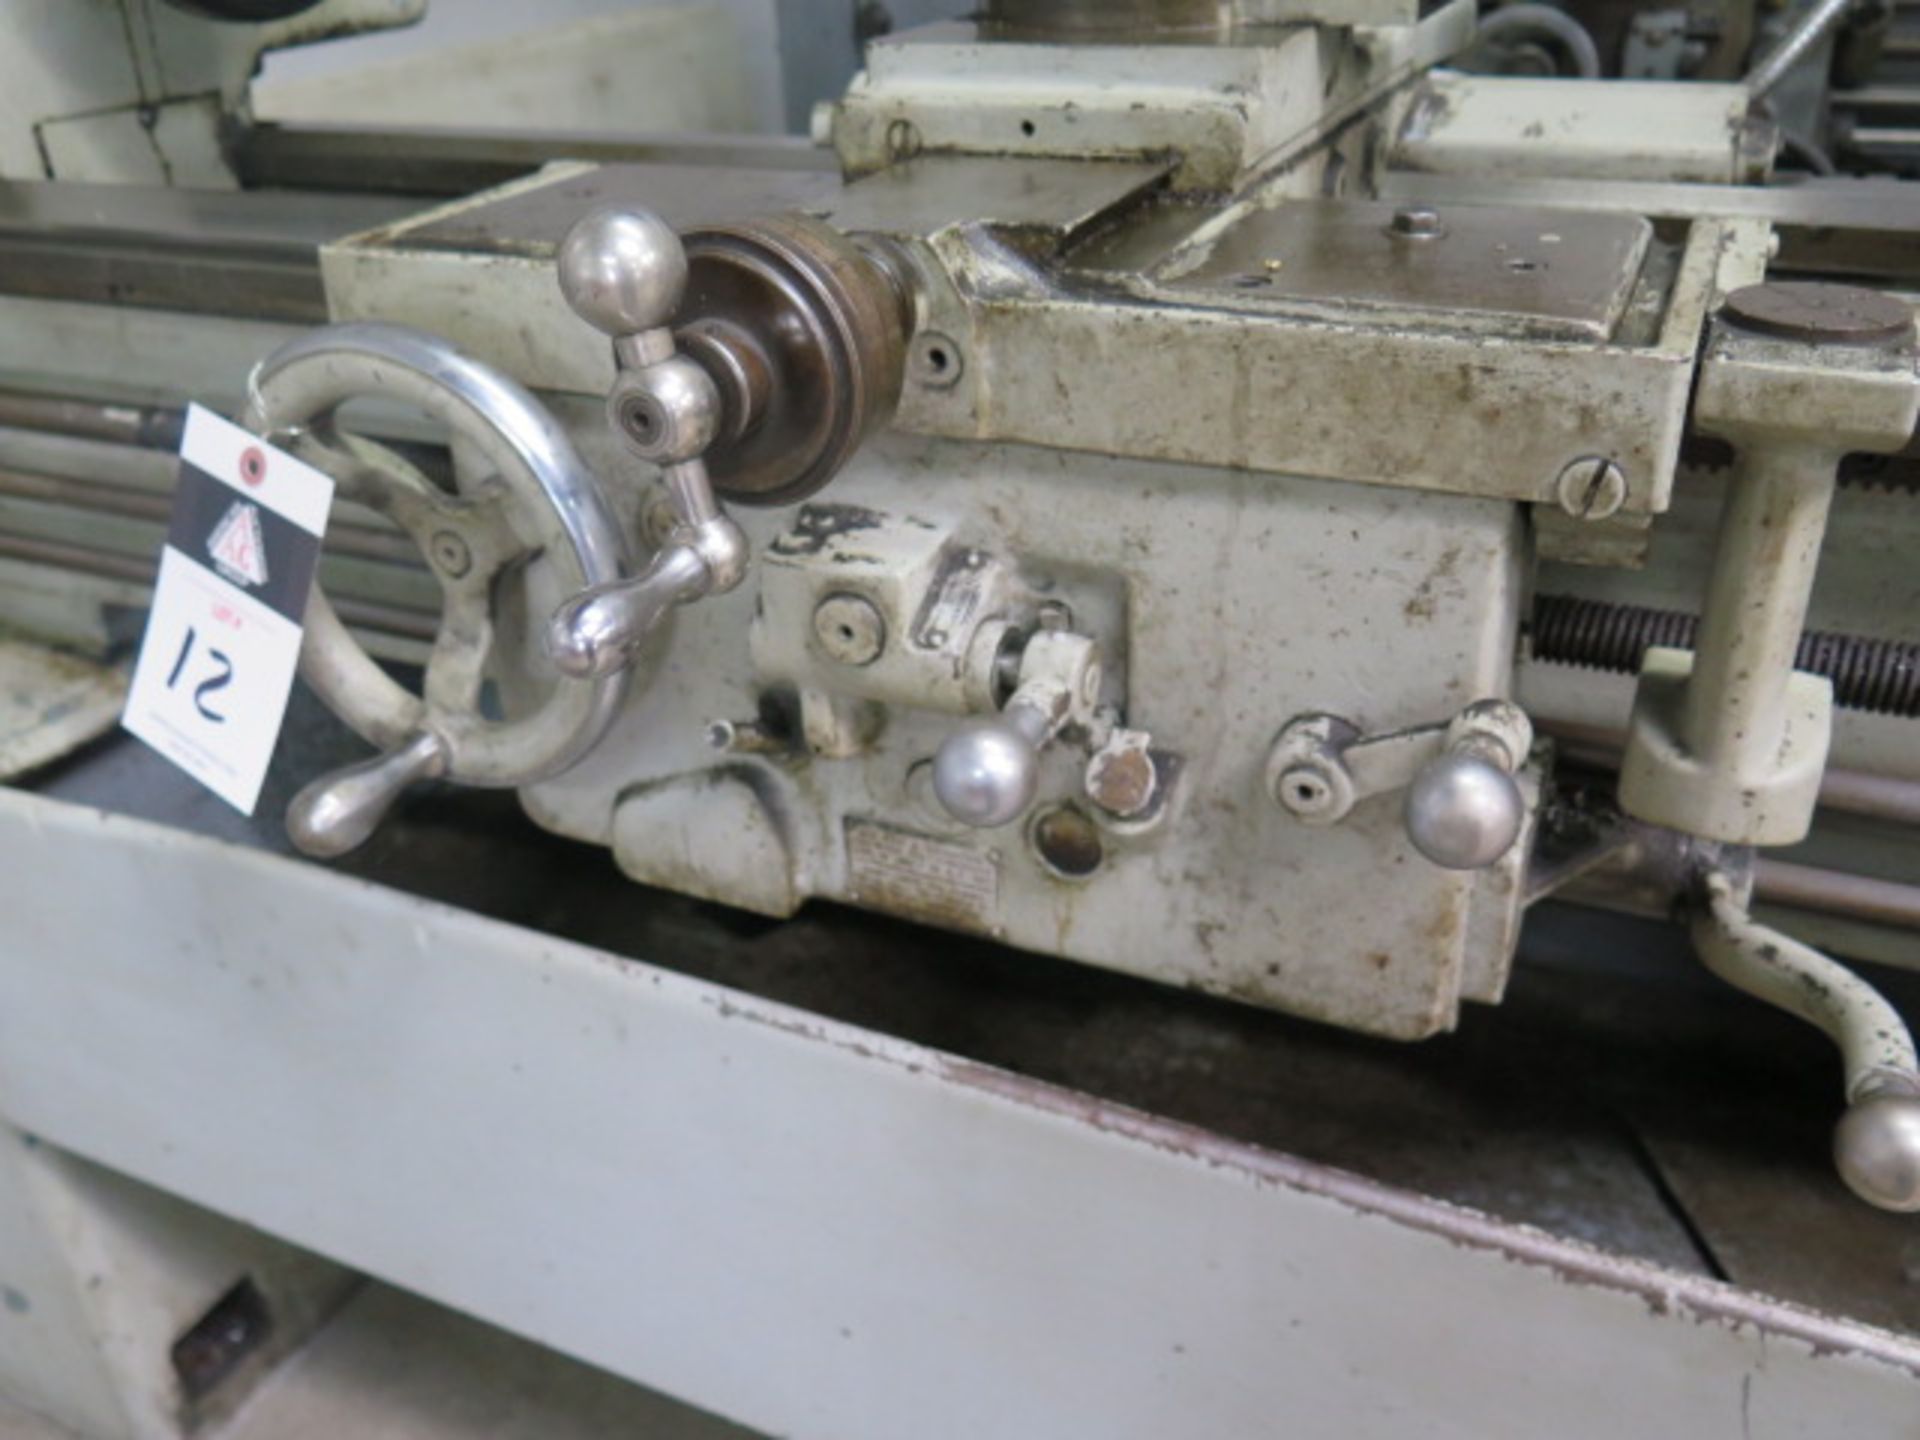 LeBlond Regal 15” x 40” Geared Head Lathe s/n 3C576 w/ 30-1200 RPM, Inch Threading, SOLD AS IS - Image 16 of 17